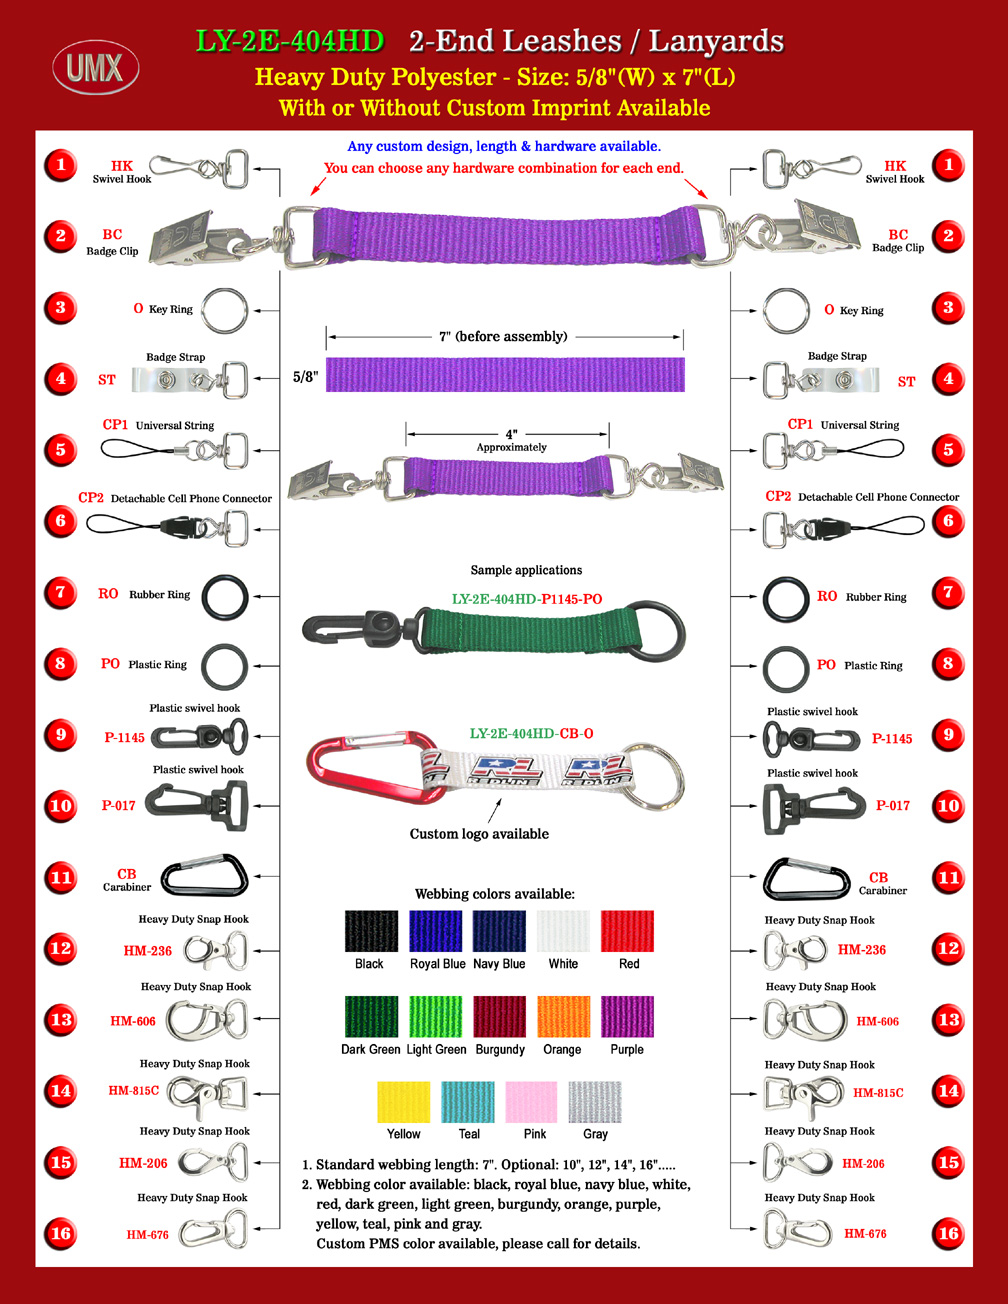 Best Seller: 5/8" Heavy Duty 2-End Leashes or Strap Lanyards with Plain Color Straps